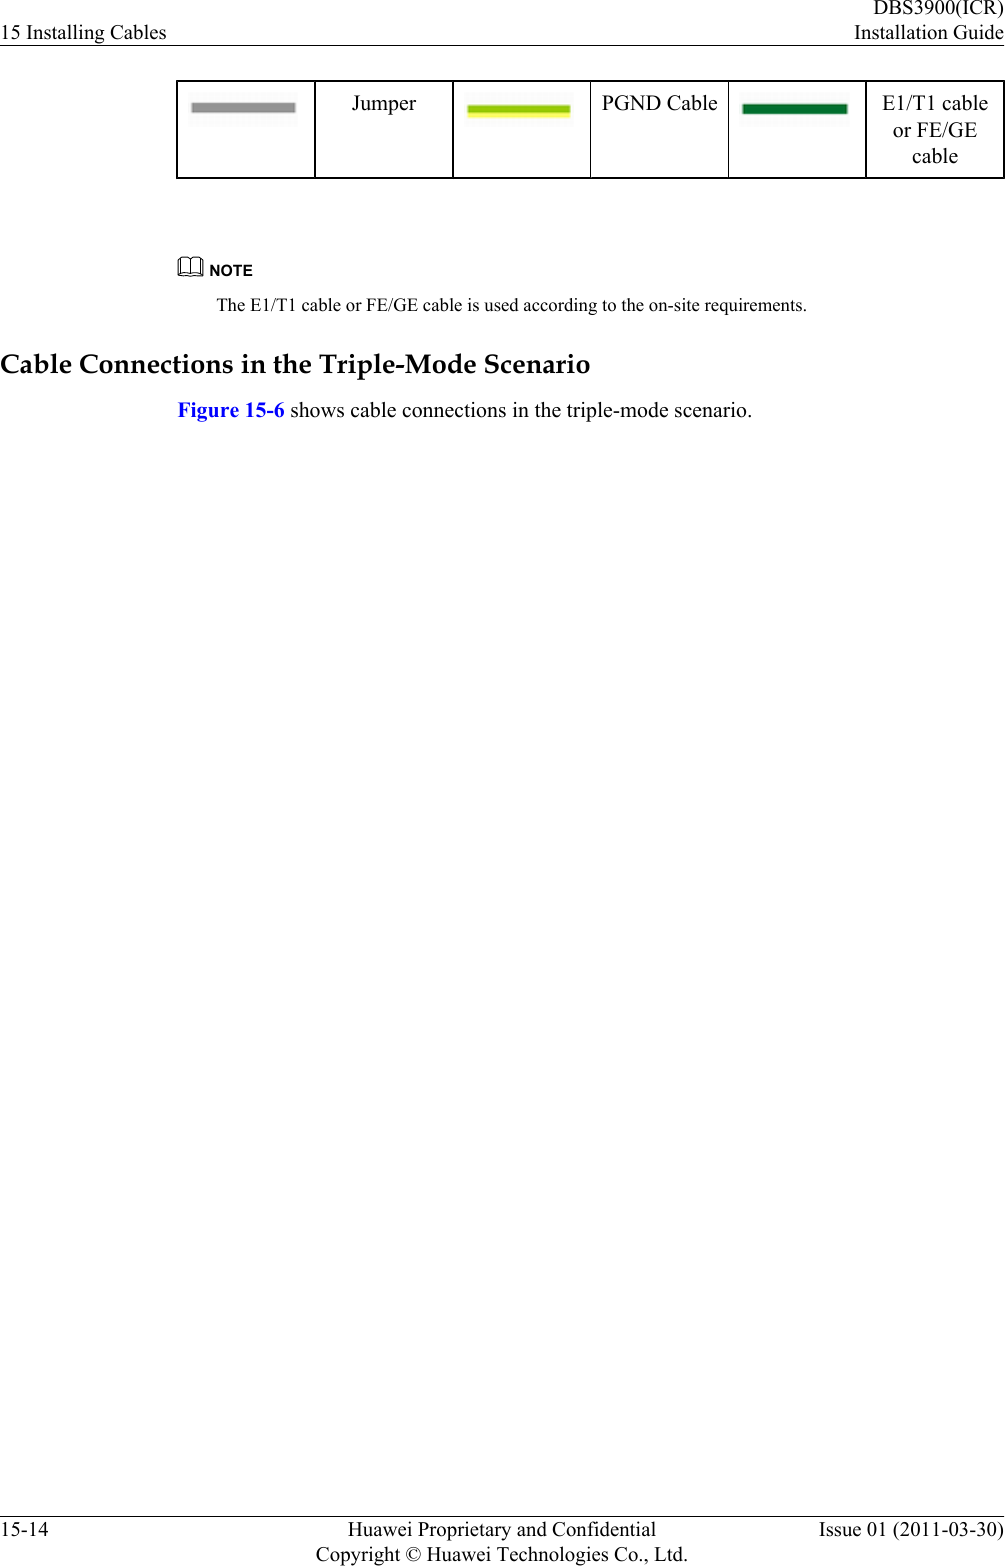 Jumper PGND Cable E1/T1 cableor FE/GEcable NOTEThe E1/T1 cable or FE/GE cable is used according to the on-site requirements.Cable Connections in the Triple-Mode ScenarioFigure 15-6 shows cable connections in the triple-mode scenario.15 Installing CablesDBS3900(ICR)Installation Guide15-14 Huawei Proprietary and ConfidentialCopyright © Huawei Technologies Co., Ltd.Issue 01 (2011-03-30)